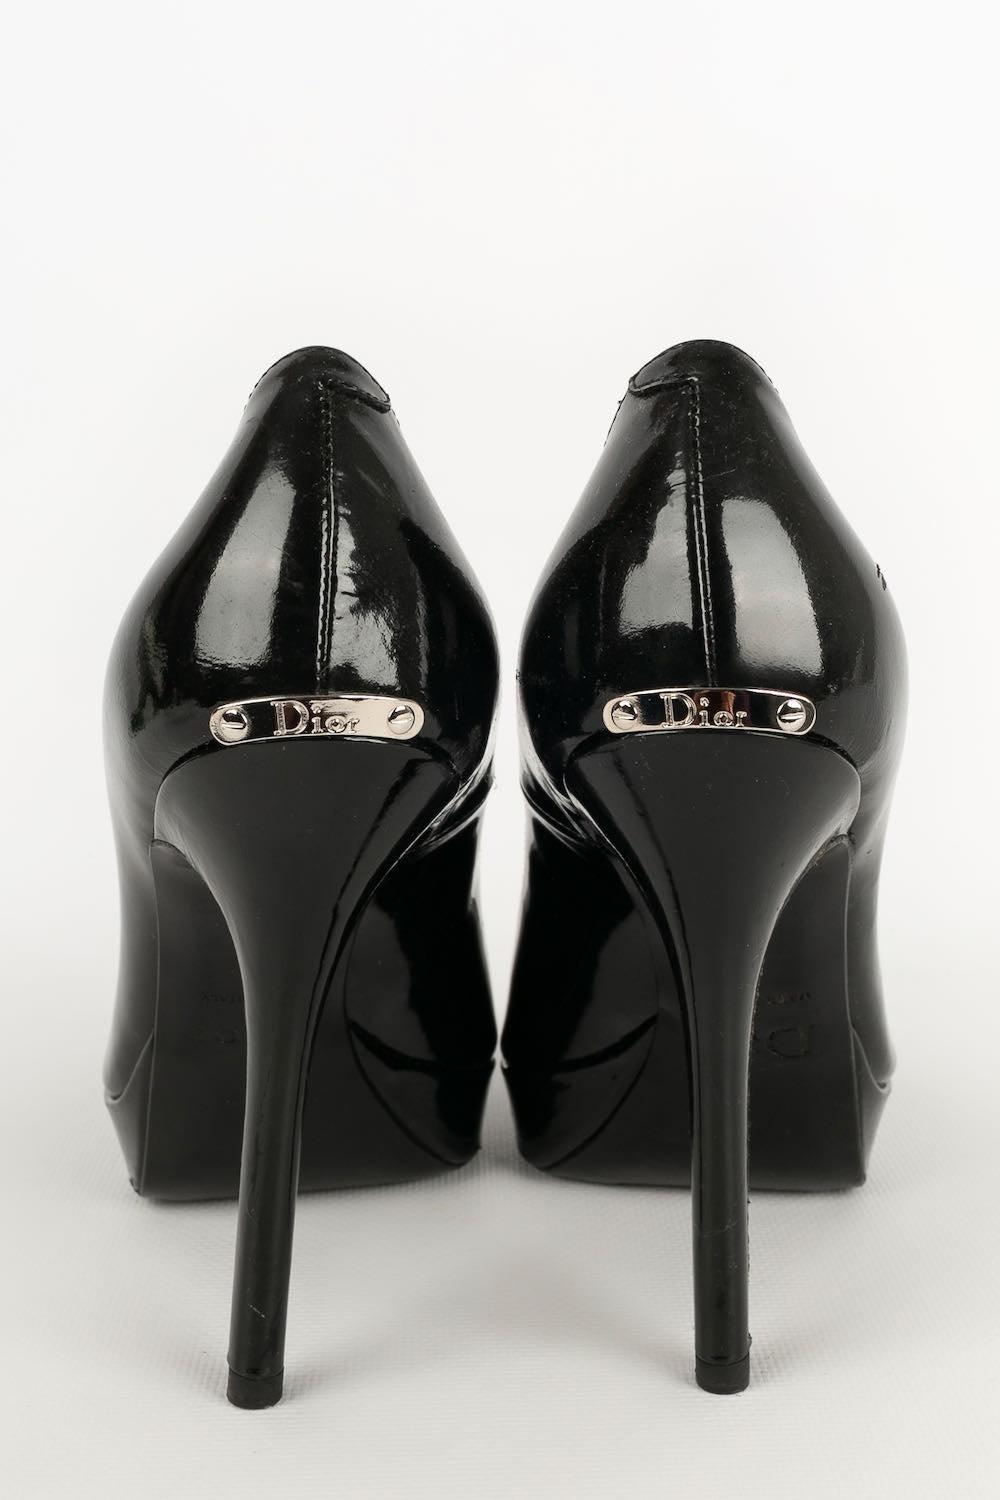 Christian Dior Shoes in Black Patent Leather Pumps In Good Condition For Sale In SAINT-OUEN-SUR-SEINE, FR